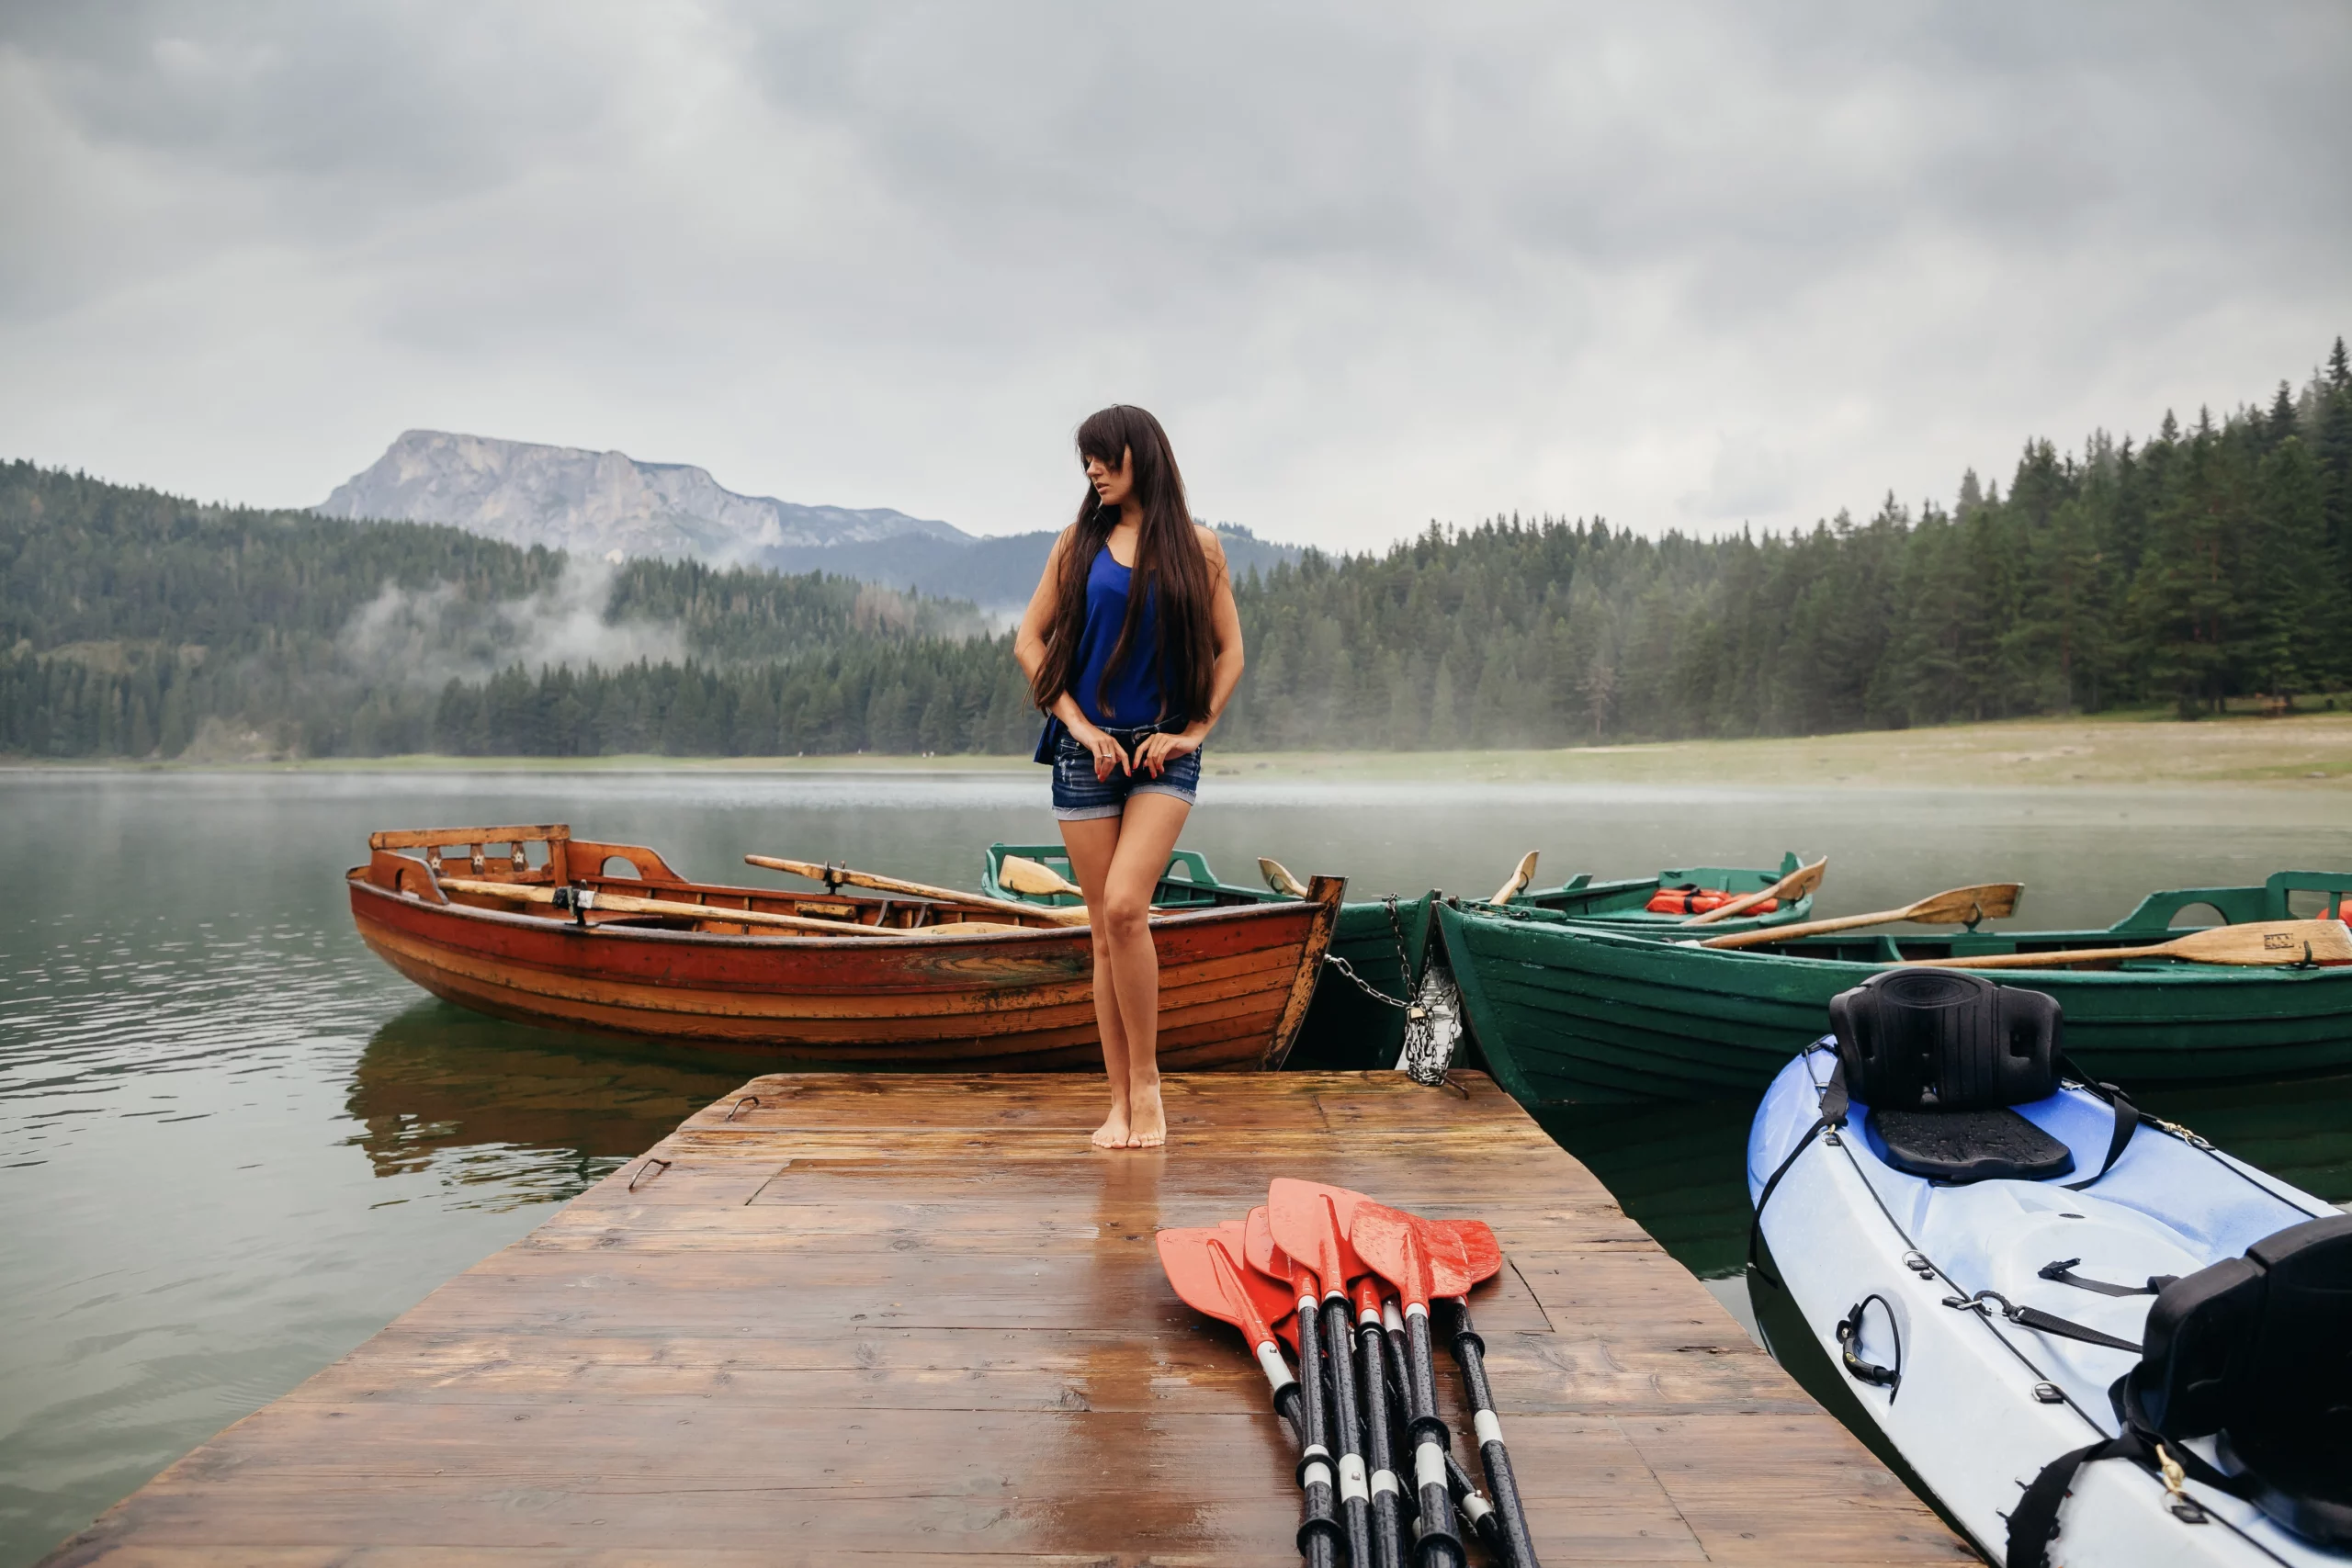 7 Best Kayak Brands: What to Consider Before Choosing a Brand?